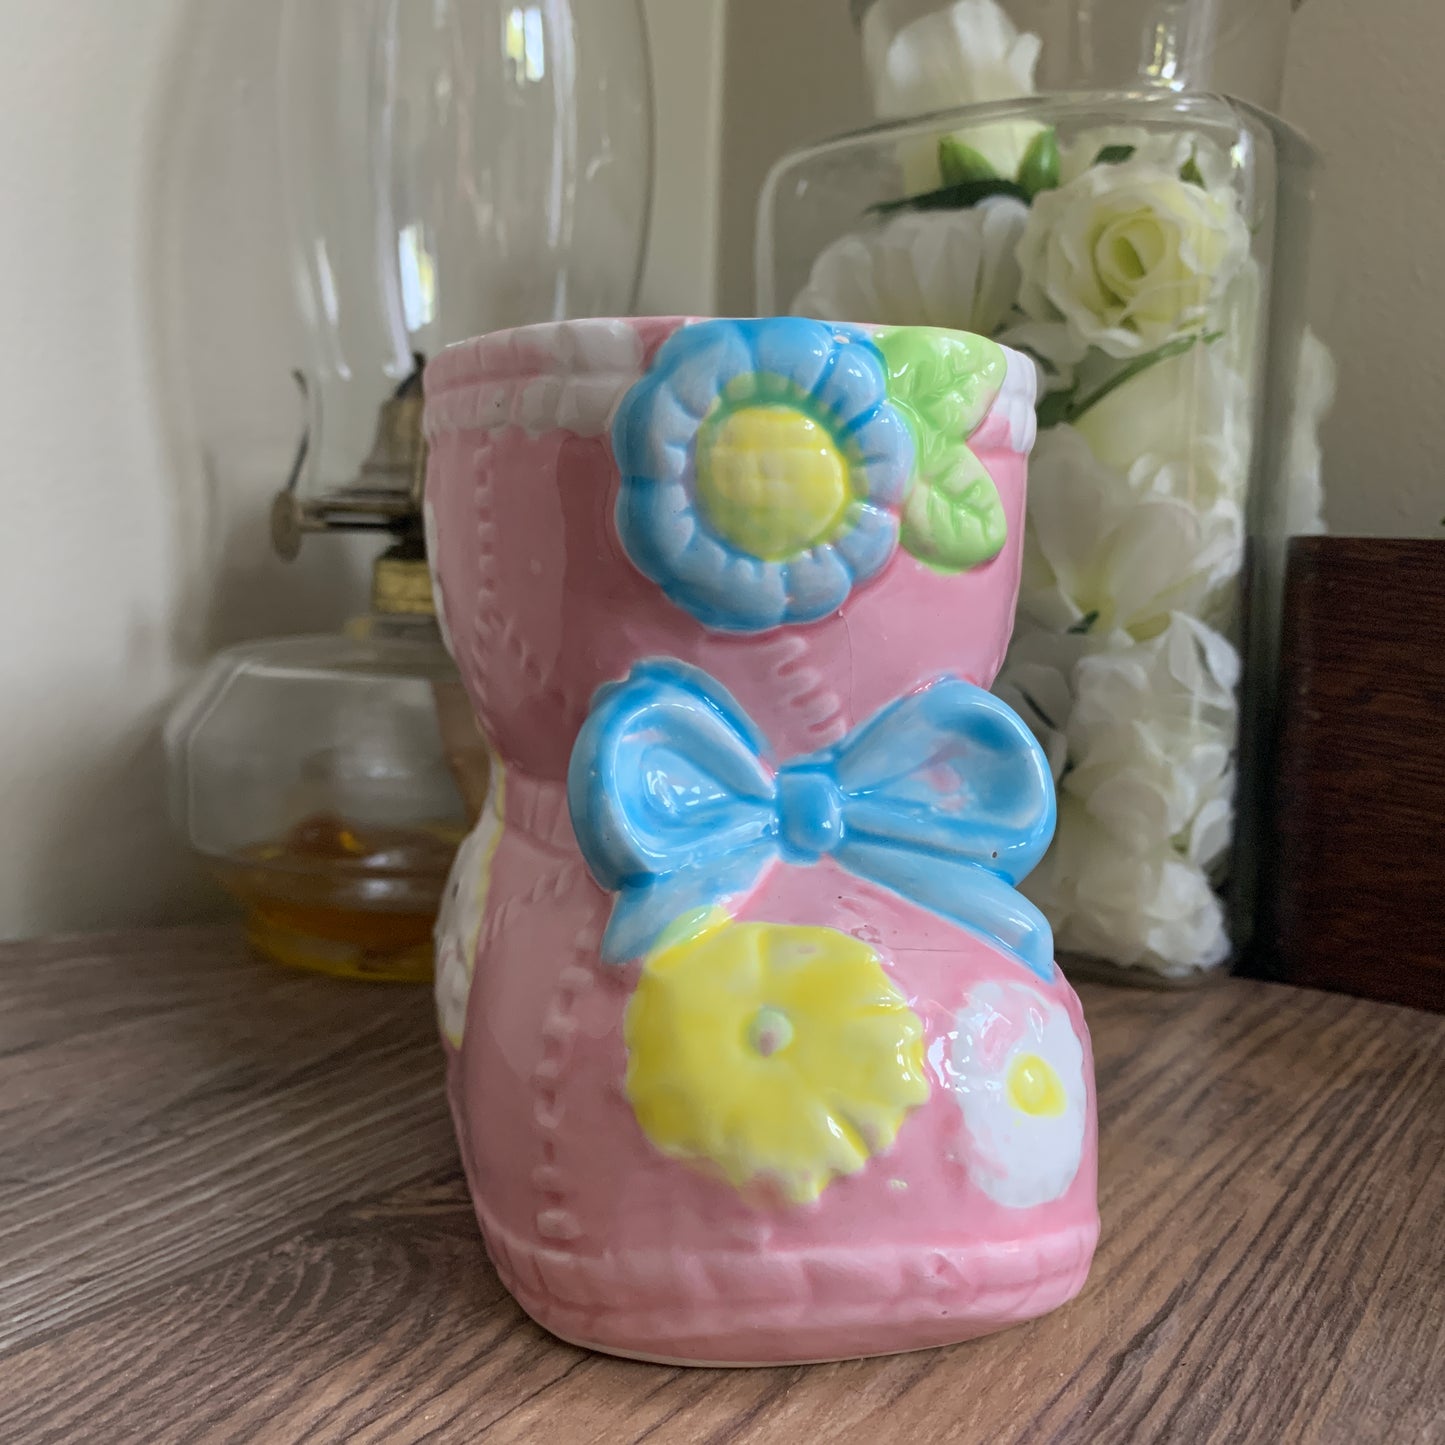 Pink Baby Bootie Ceramic Planter or Flower Vase Shower Gifts for Baby Girl